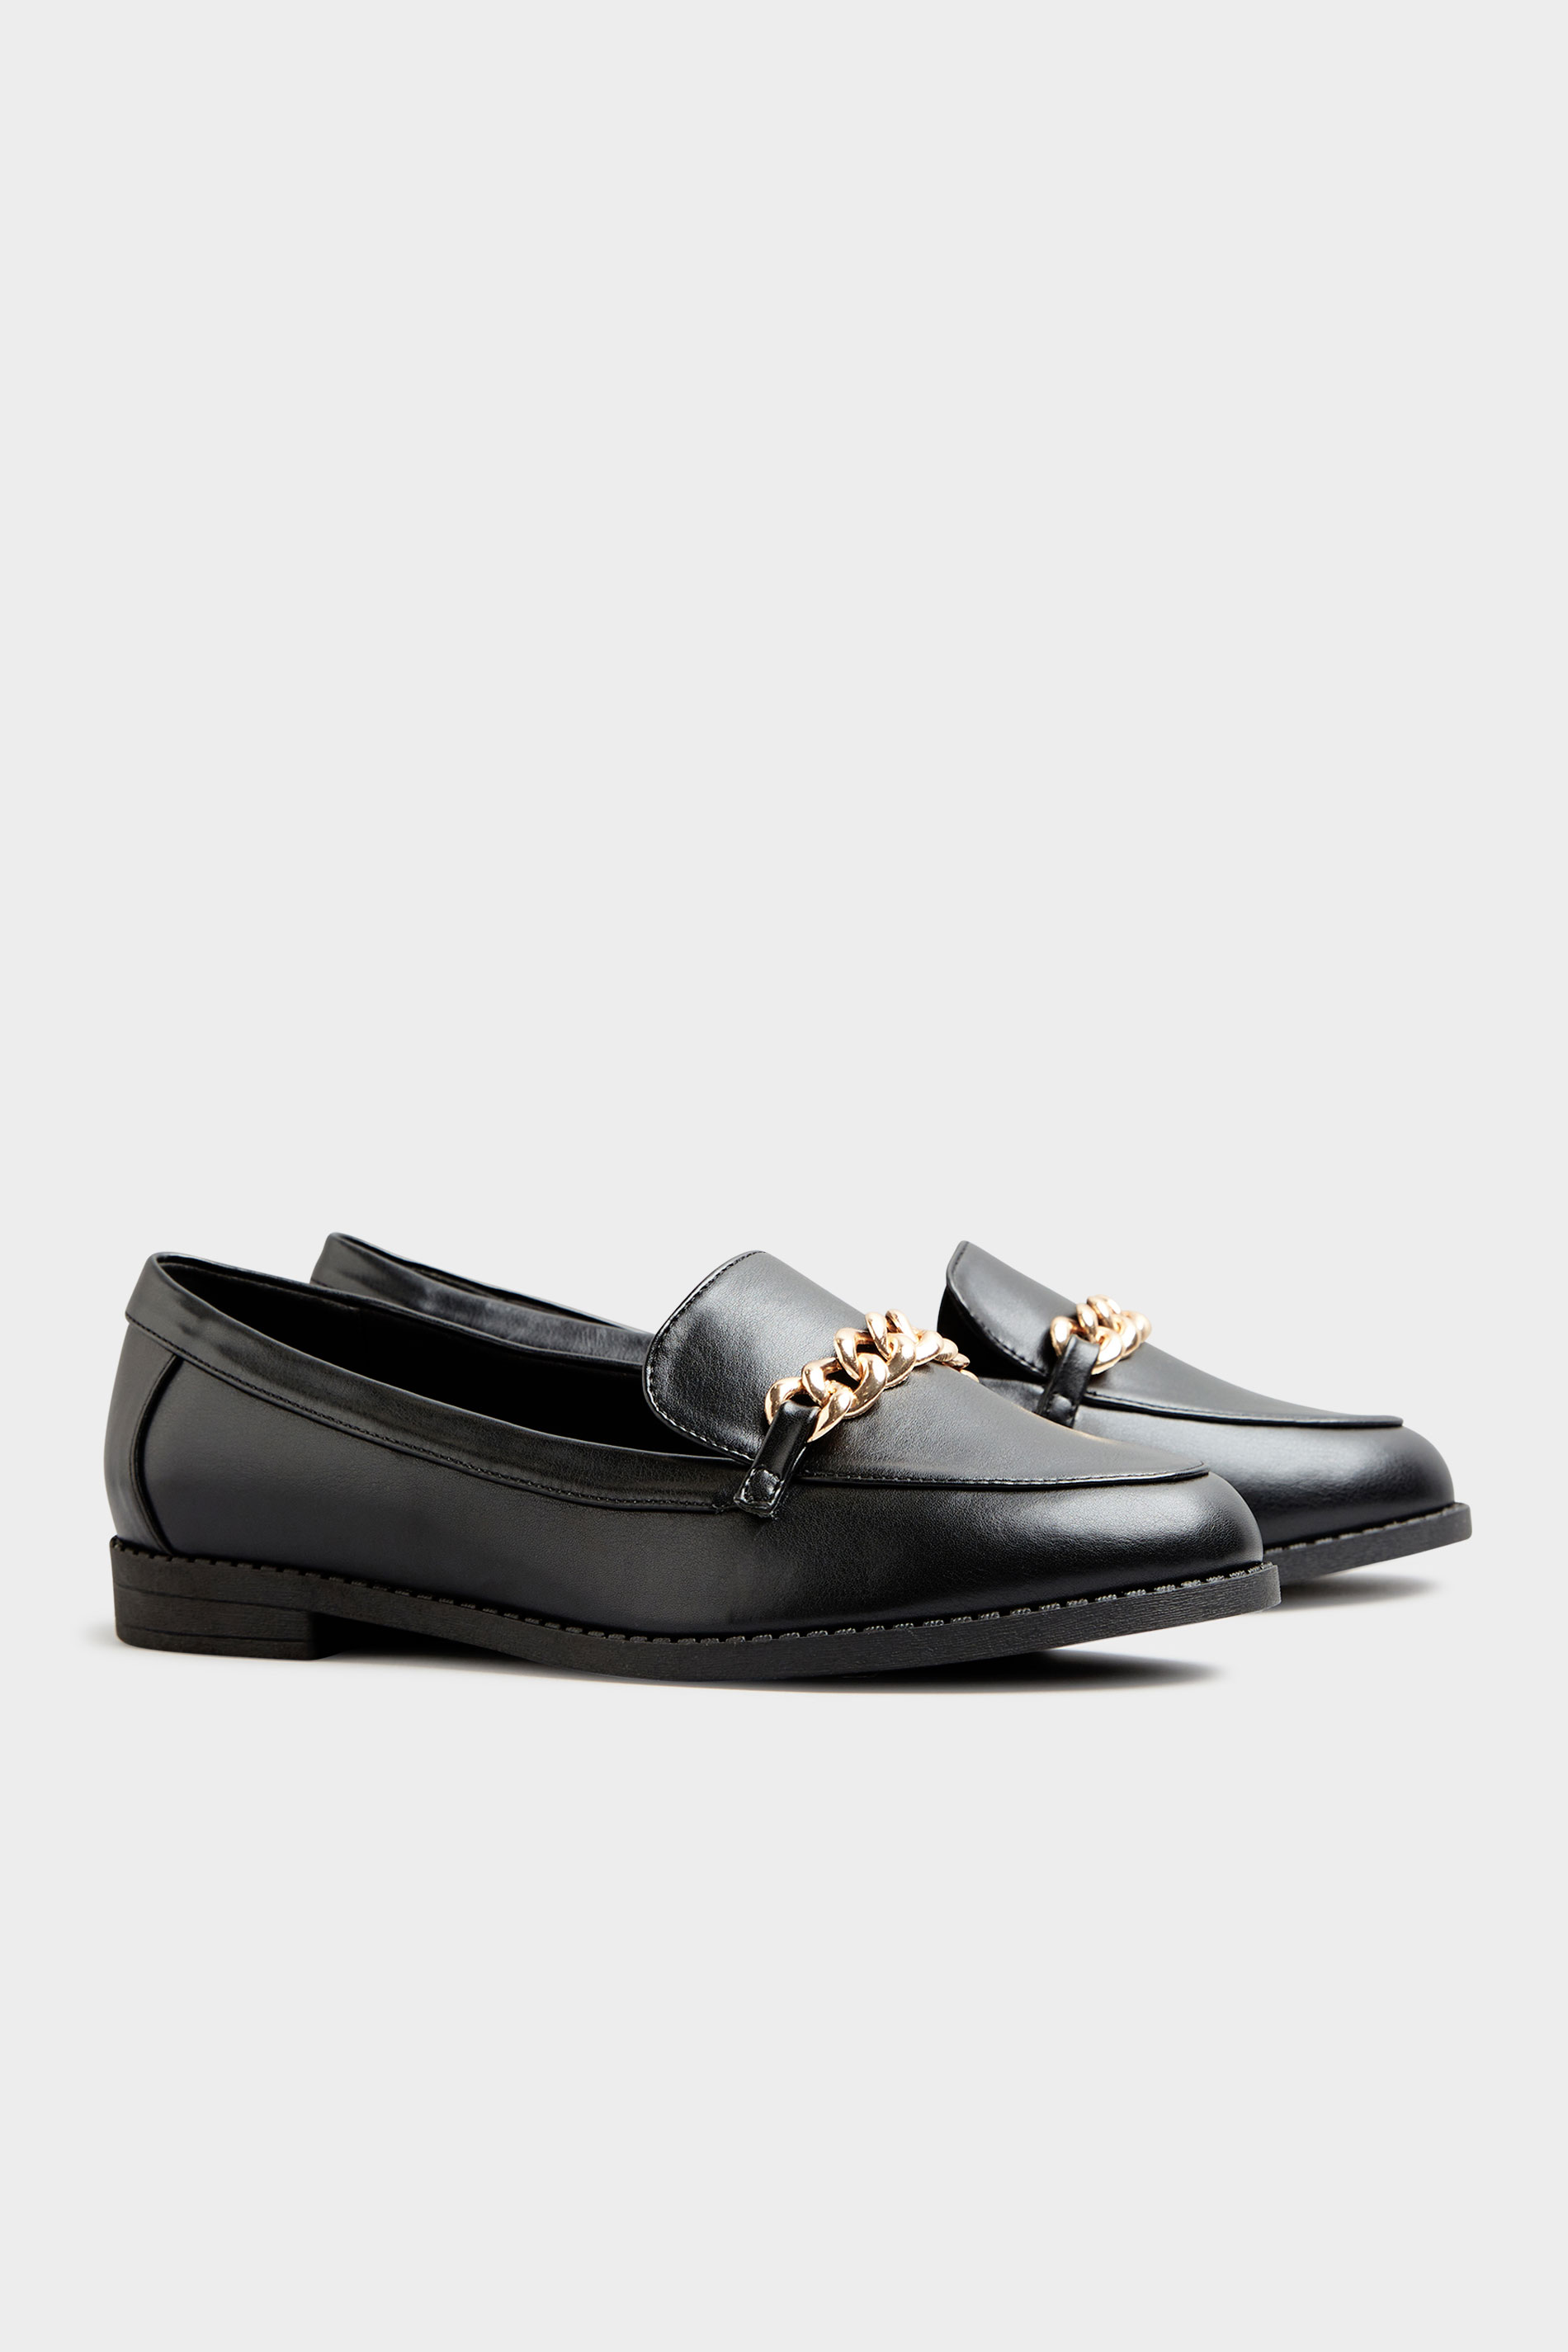 Black Chain Loafers In Extra Wide Fit_C.jpg